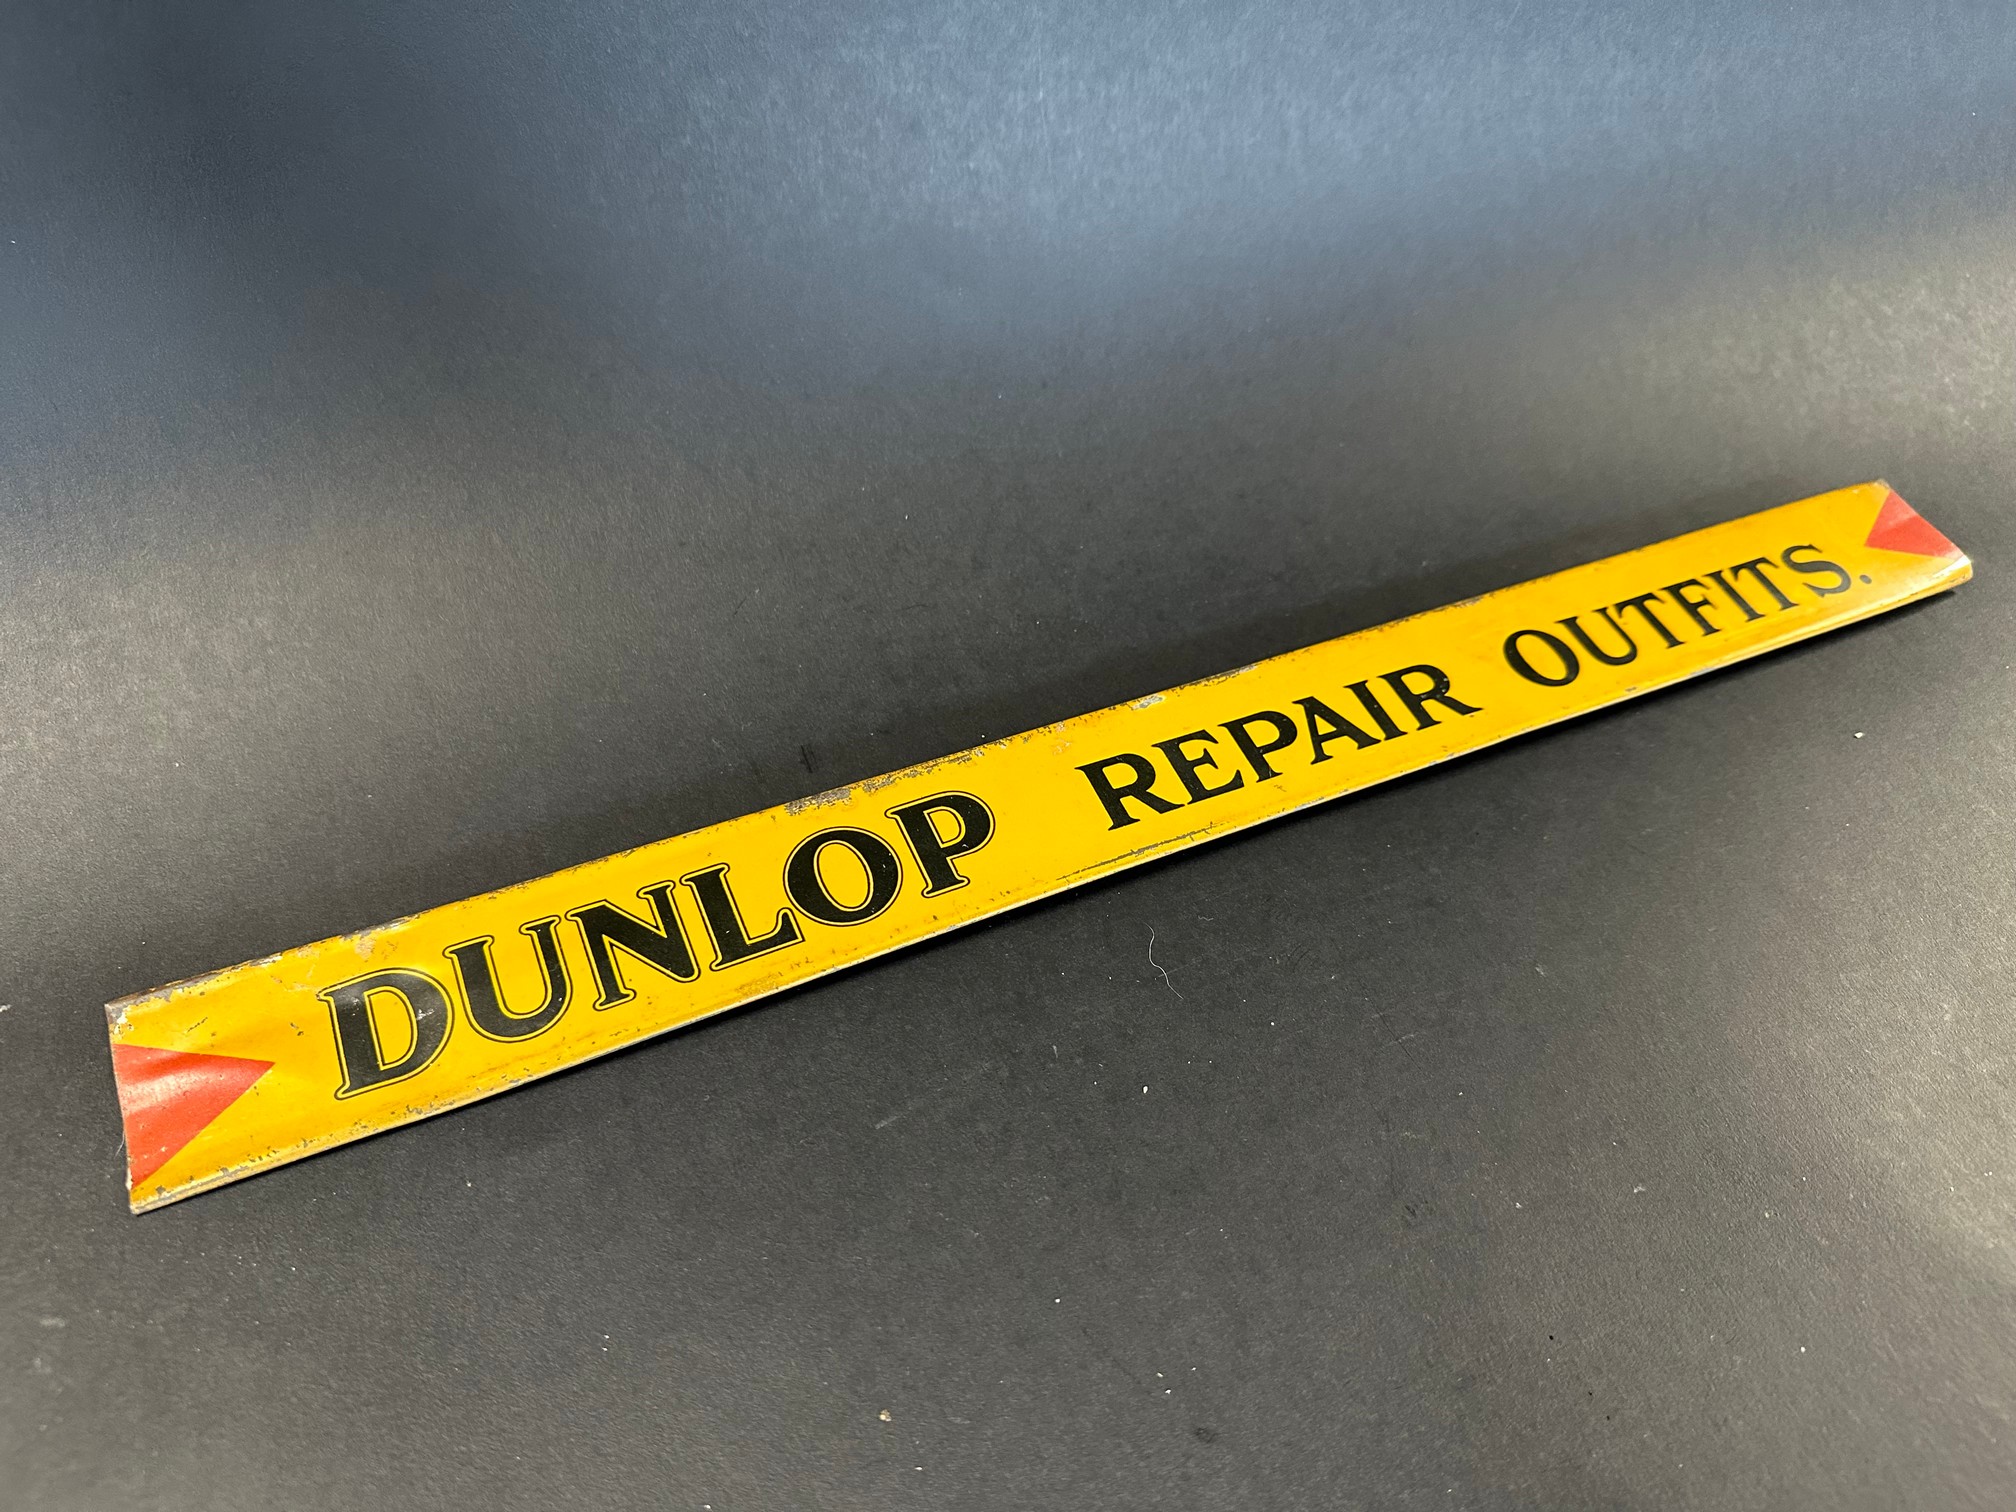 A Dunlop Repair Outfits shelf strip in good condition.